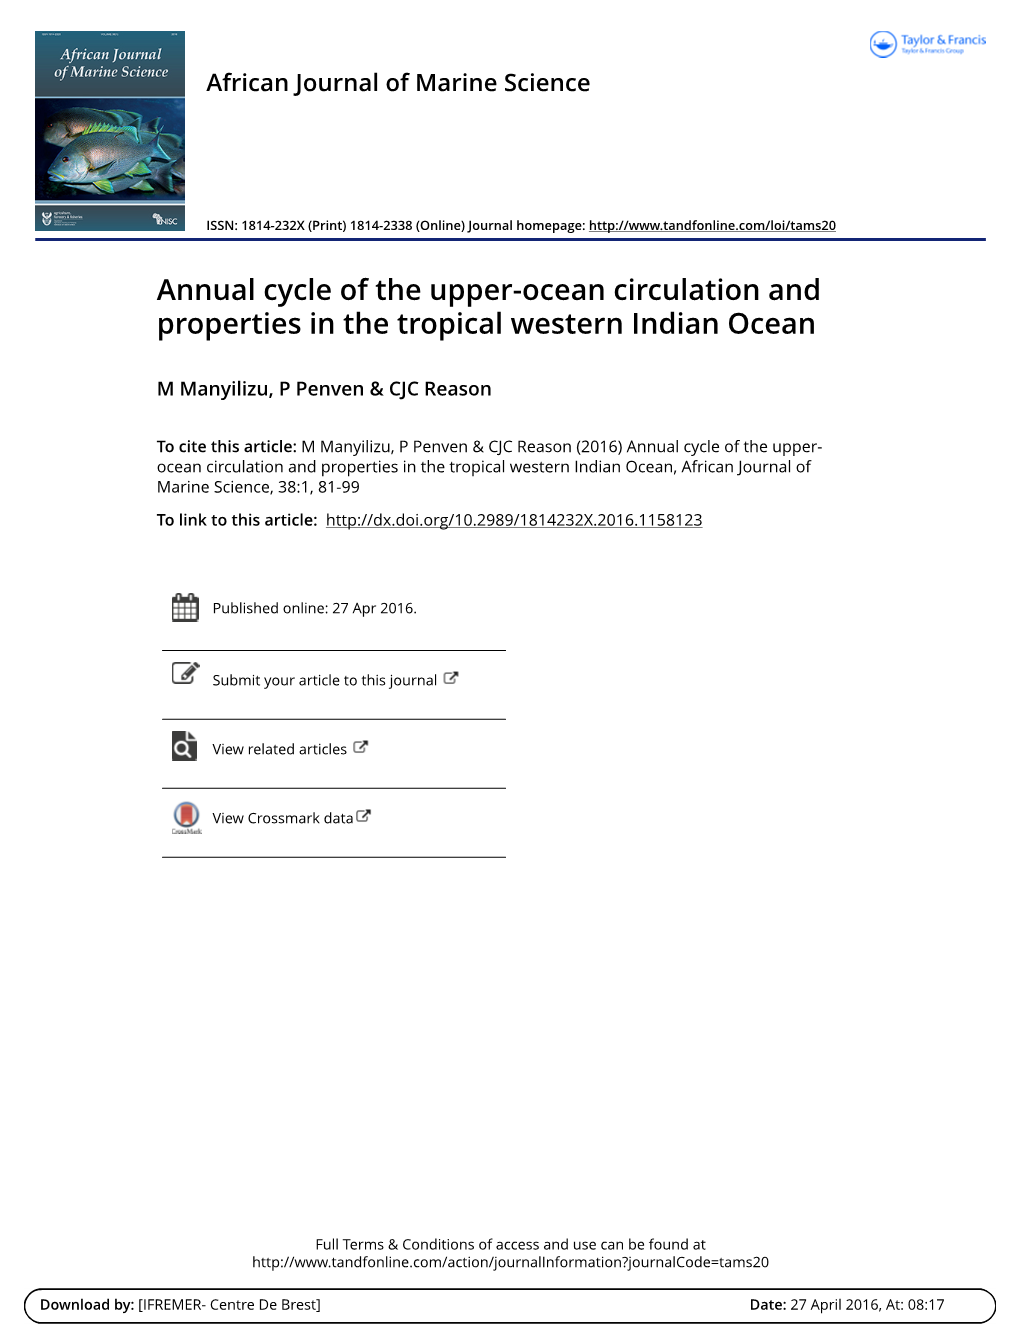 Annual Cycle of the Upper-Ocean Circulation and Properties in the Tropical Western Indian Ocean